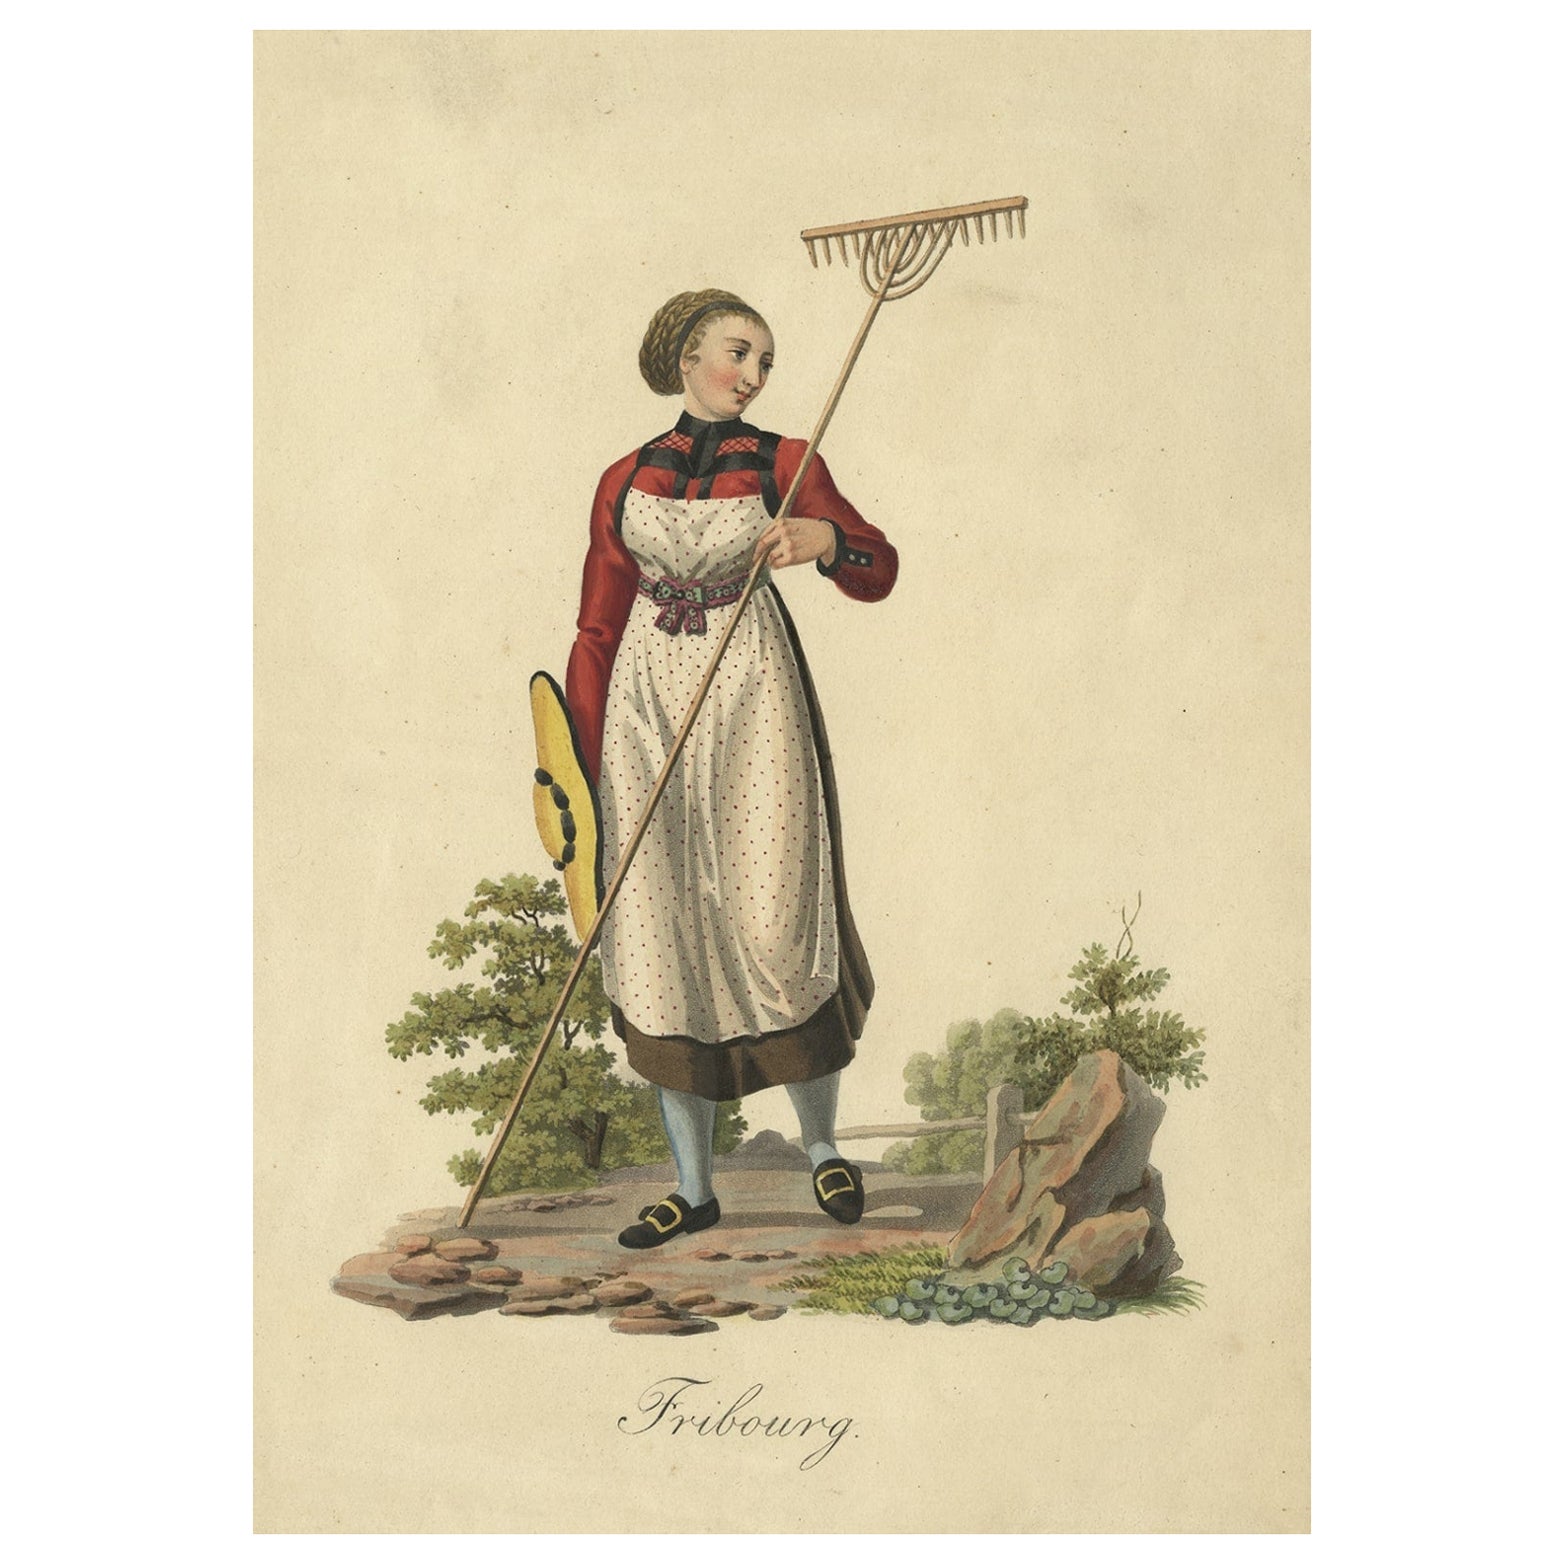 Old Hand-Colored Engraving of a Farmer's Wife from Fribourg, Switzerland, c.1860 For Sale